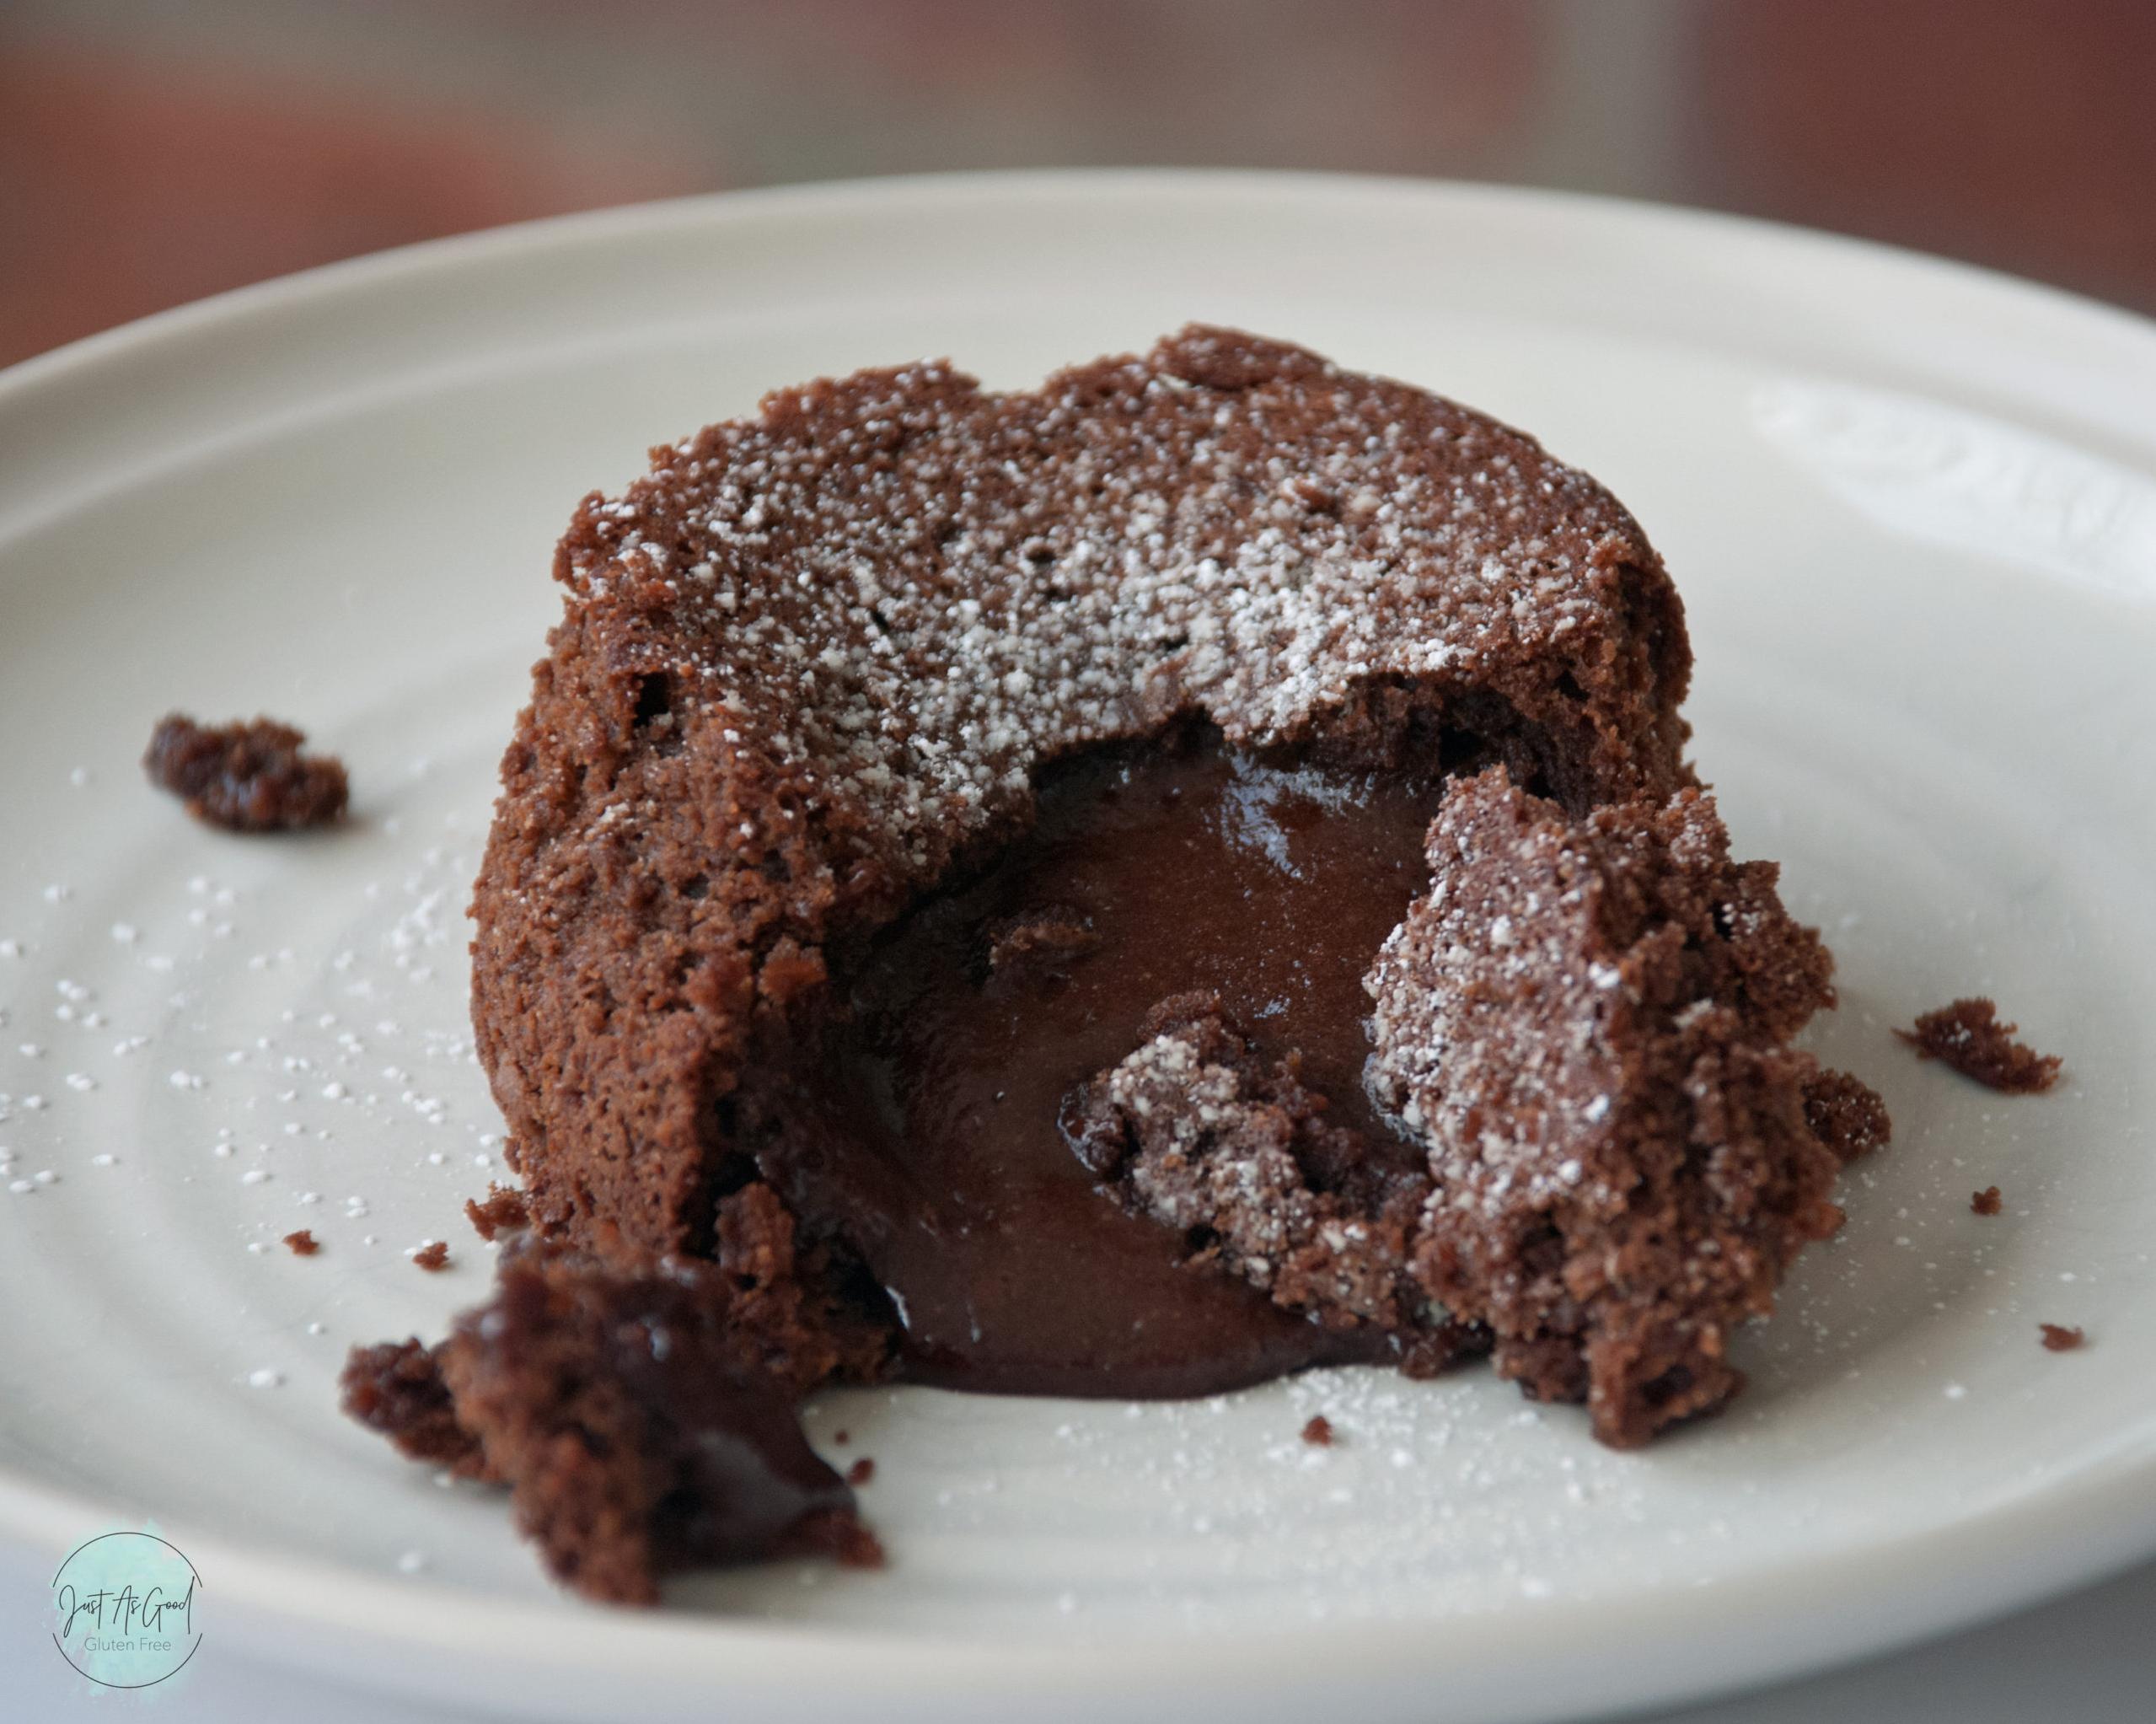  Want to know the secret to a perfect date night in? Make these molten lava cakes!